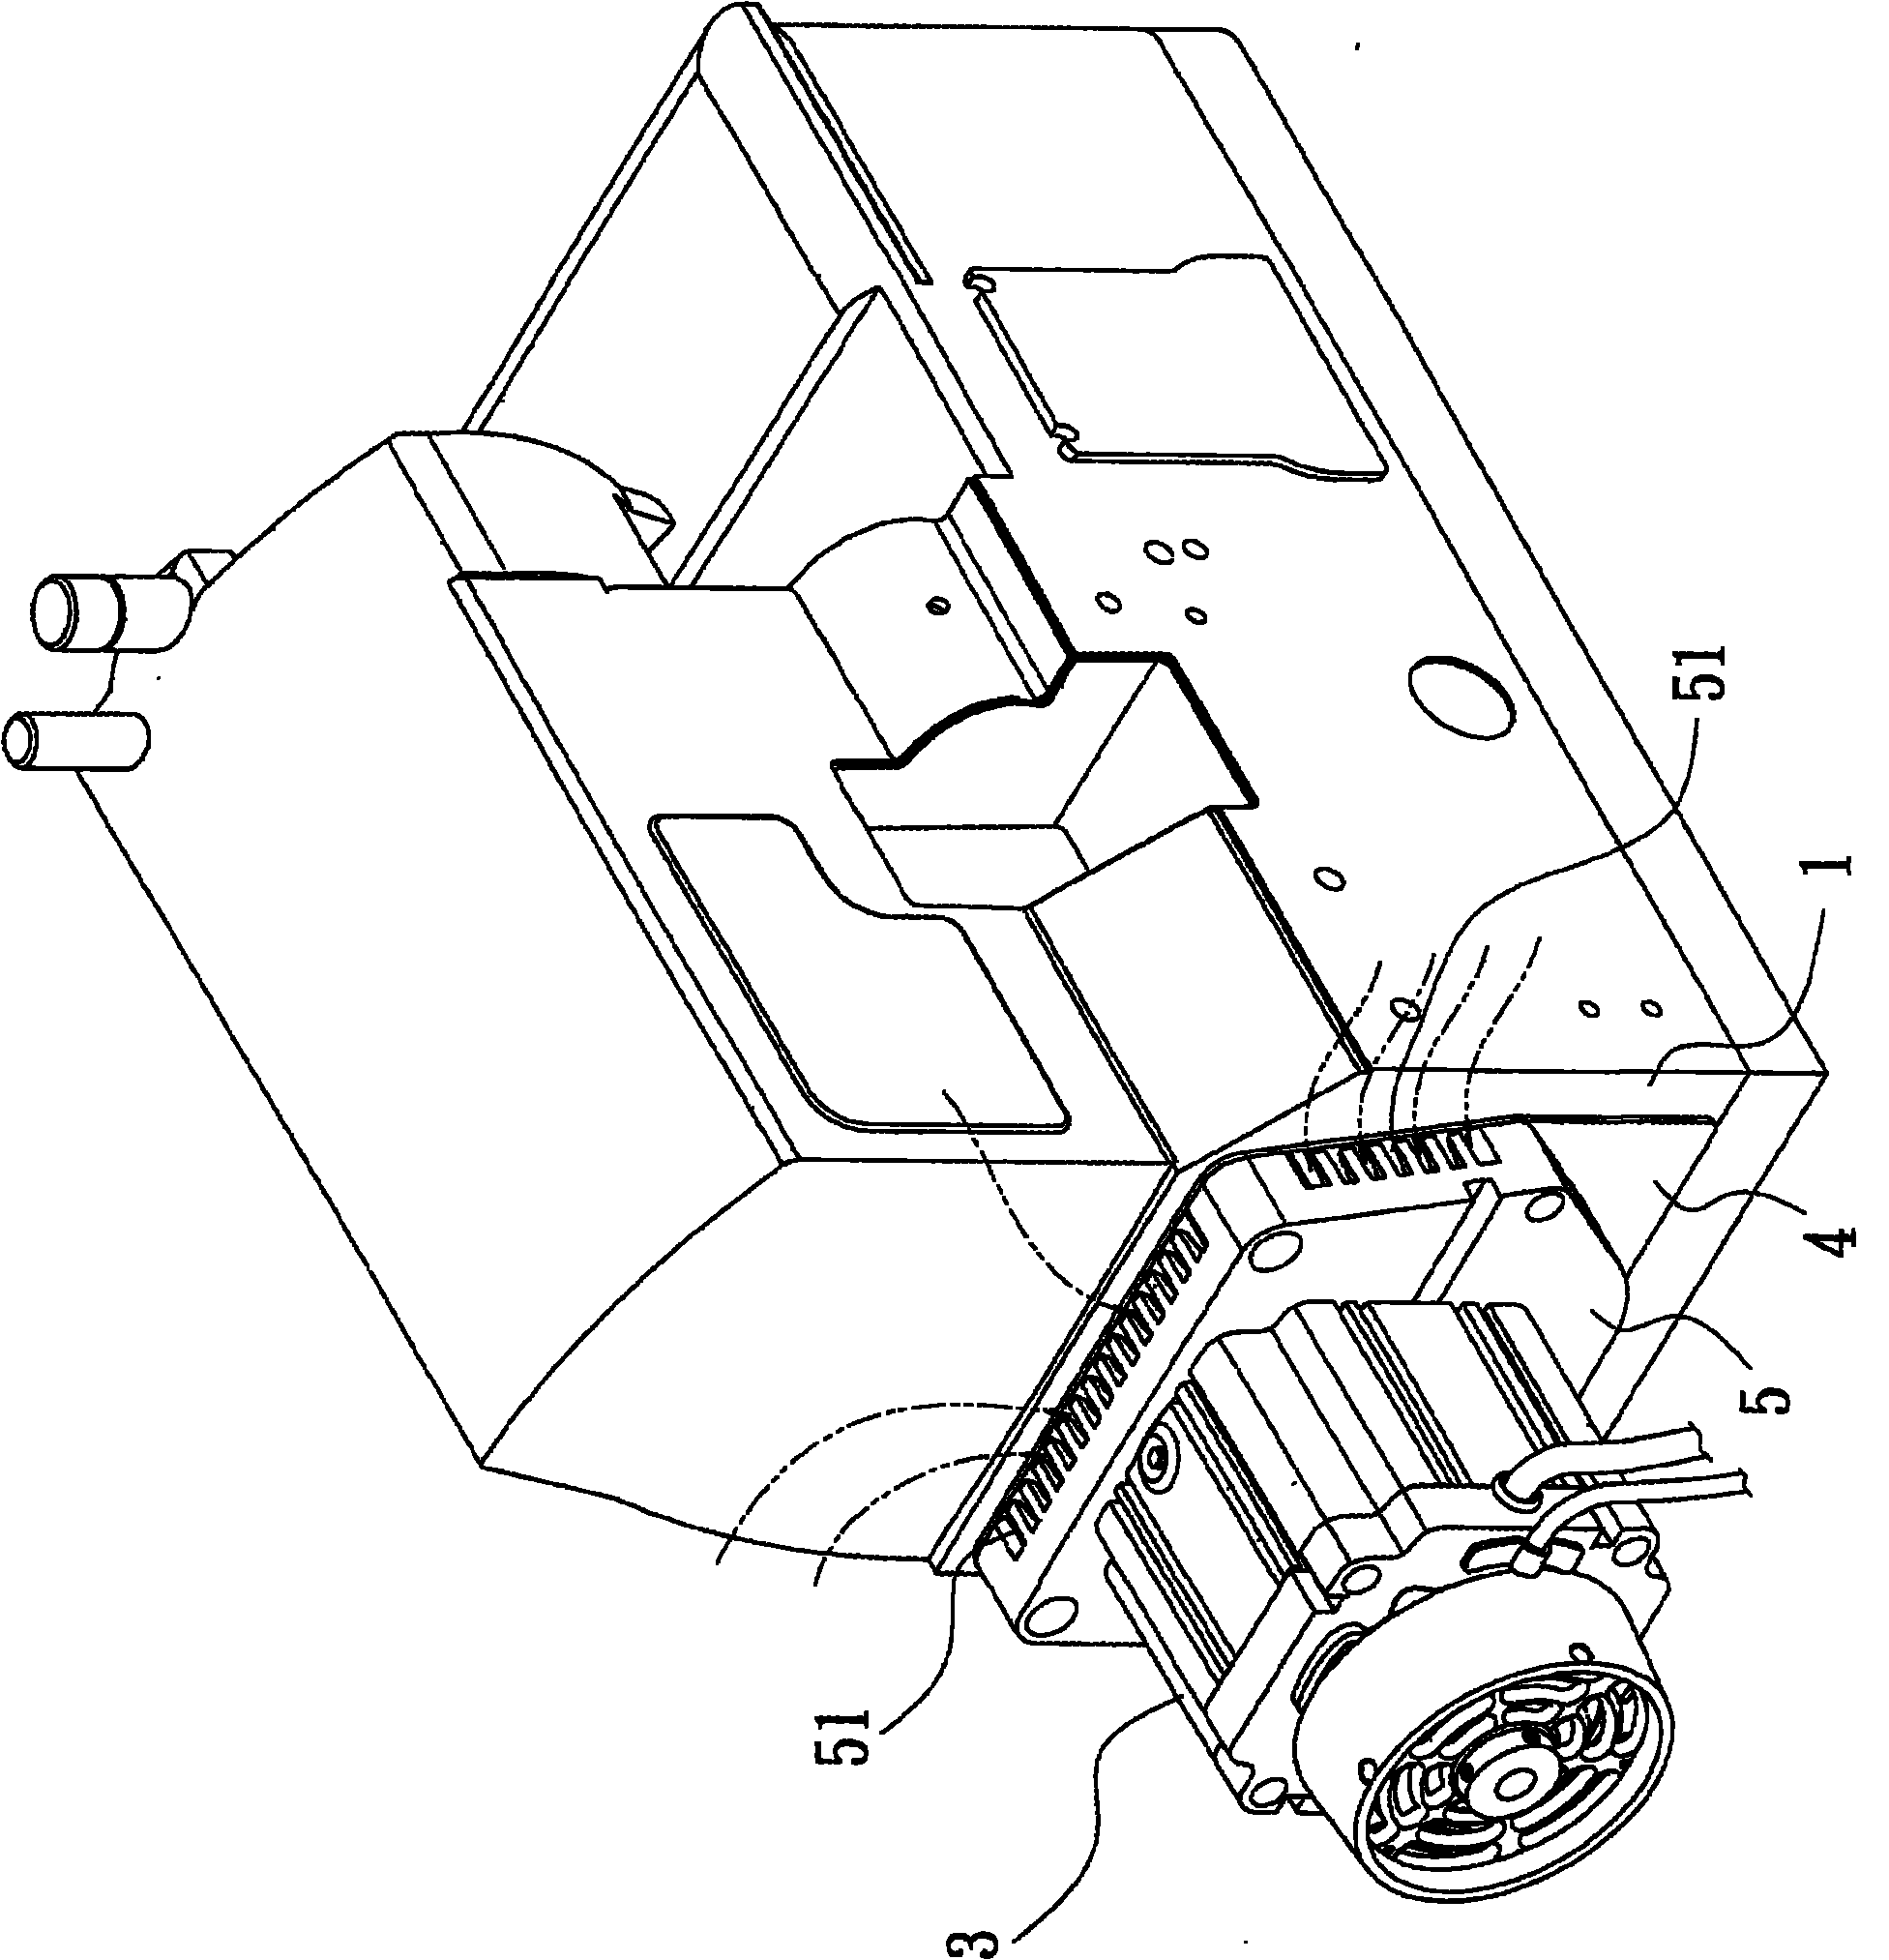 Heat dissipating method for sewing machine with direct-drive motor